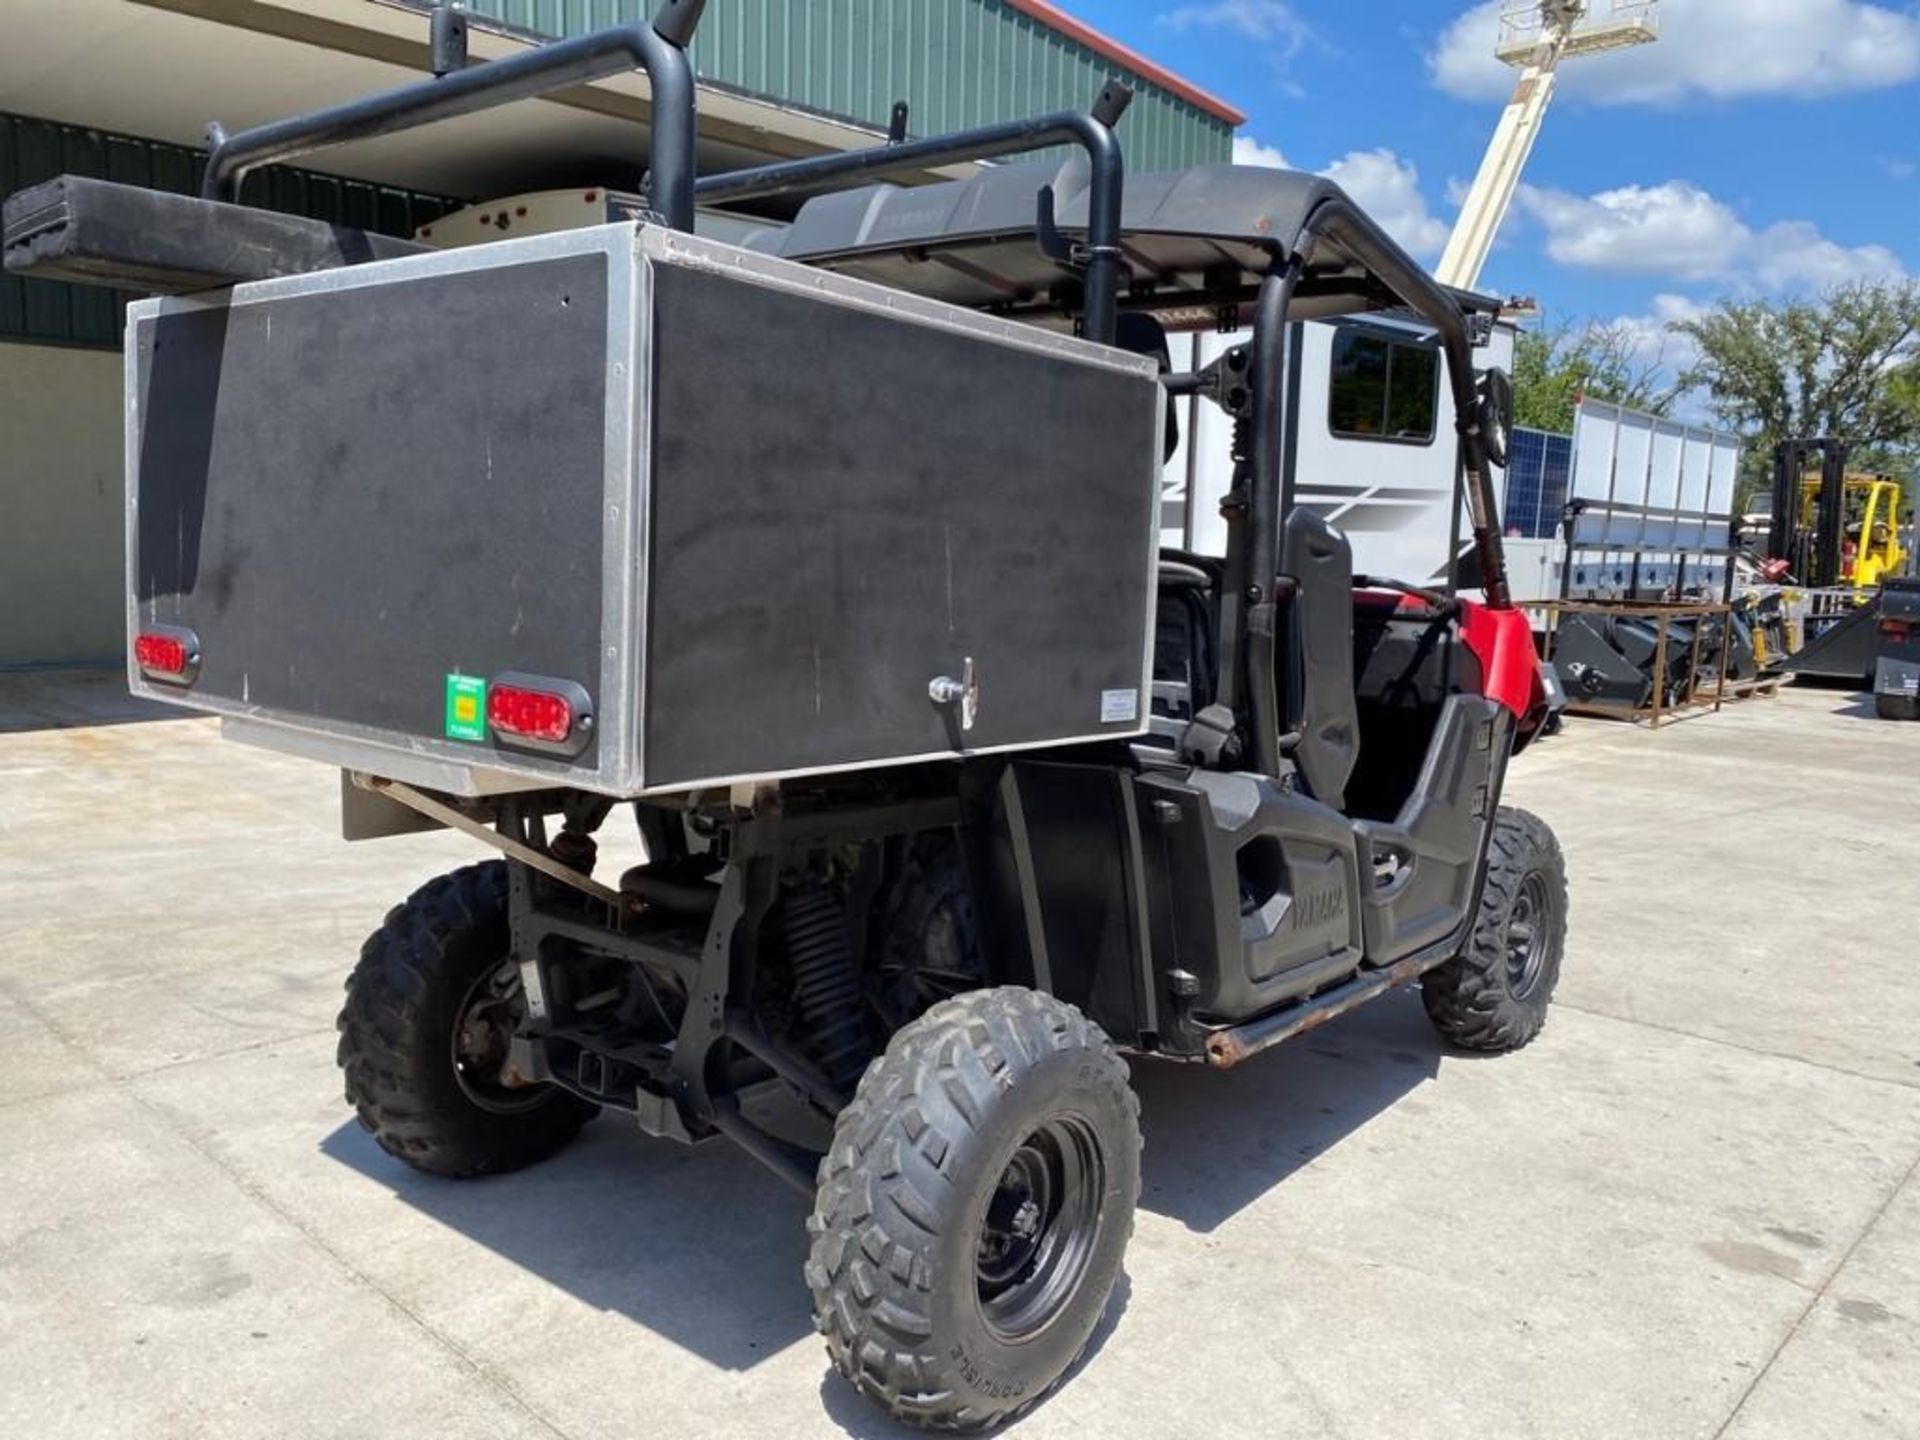 YAMAHA UTV WITH TOOL/STORAGE BIN, HAS RUST ON UNDER CARRIAGE AND FRAME, RUNS AND OPERATES - Image 9 of 20